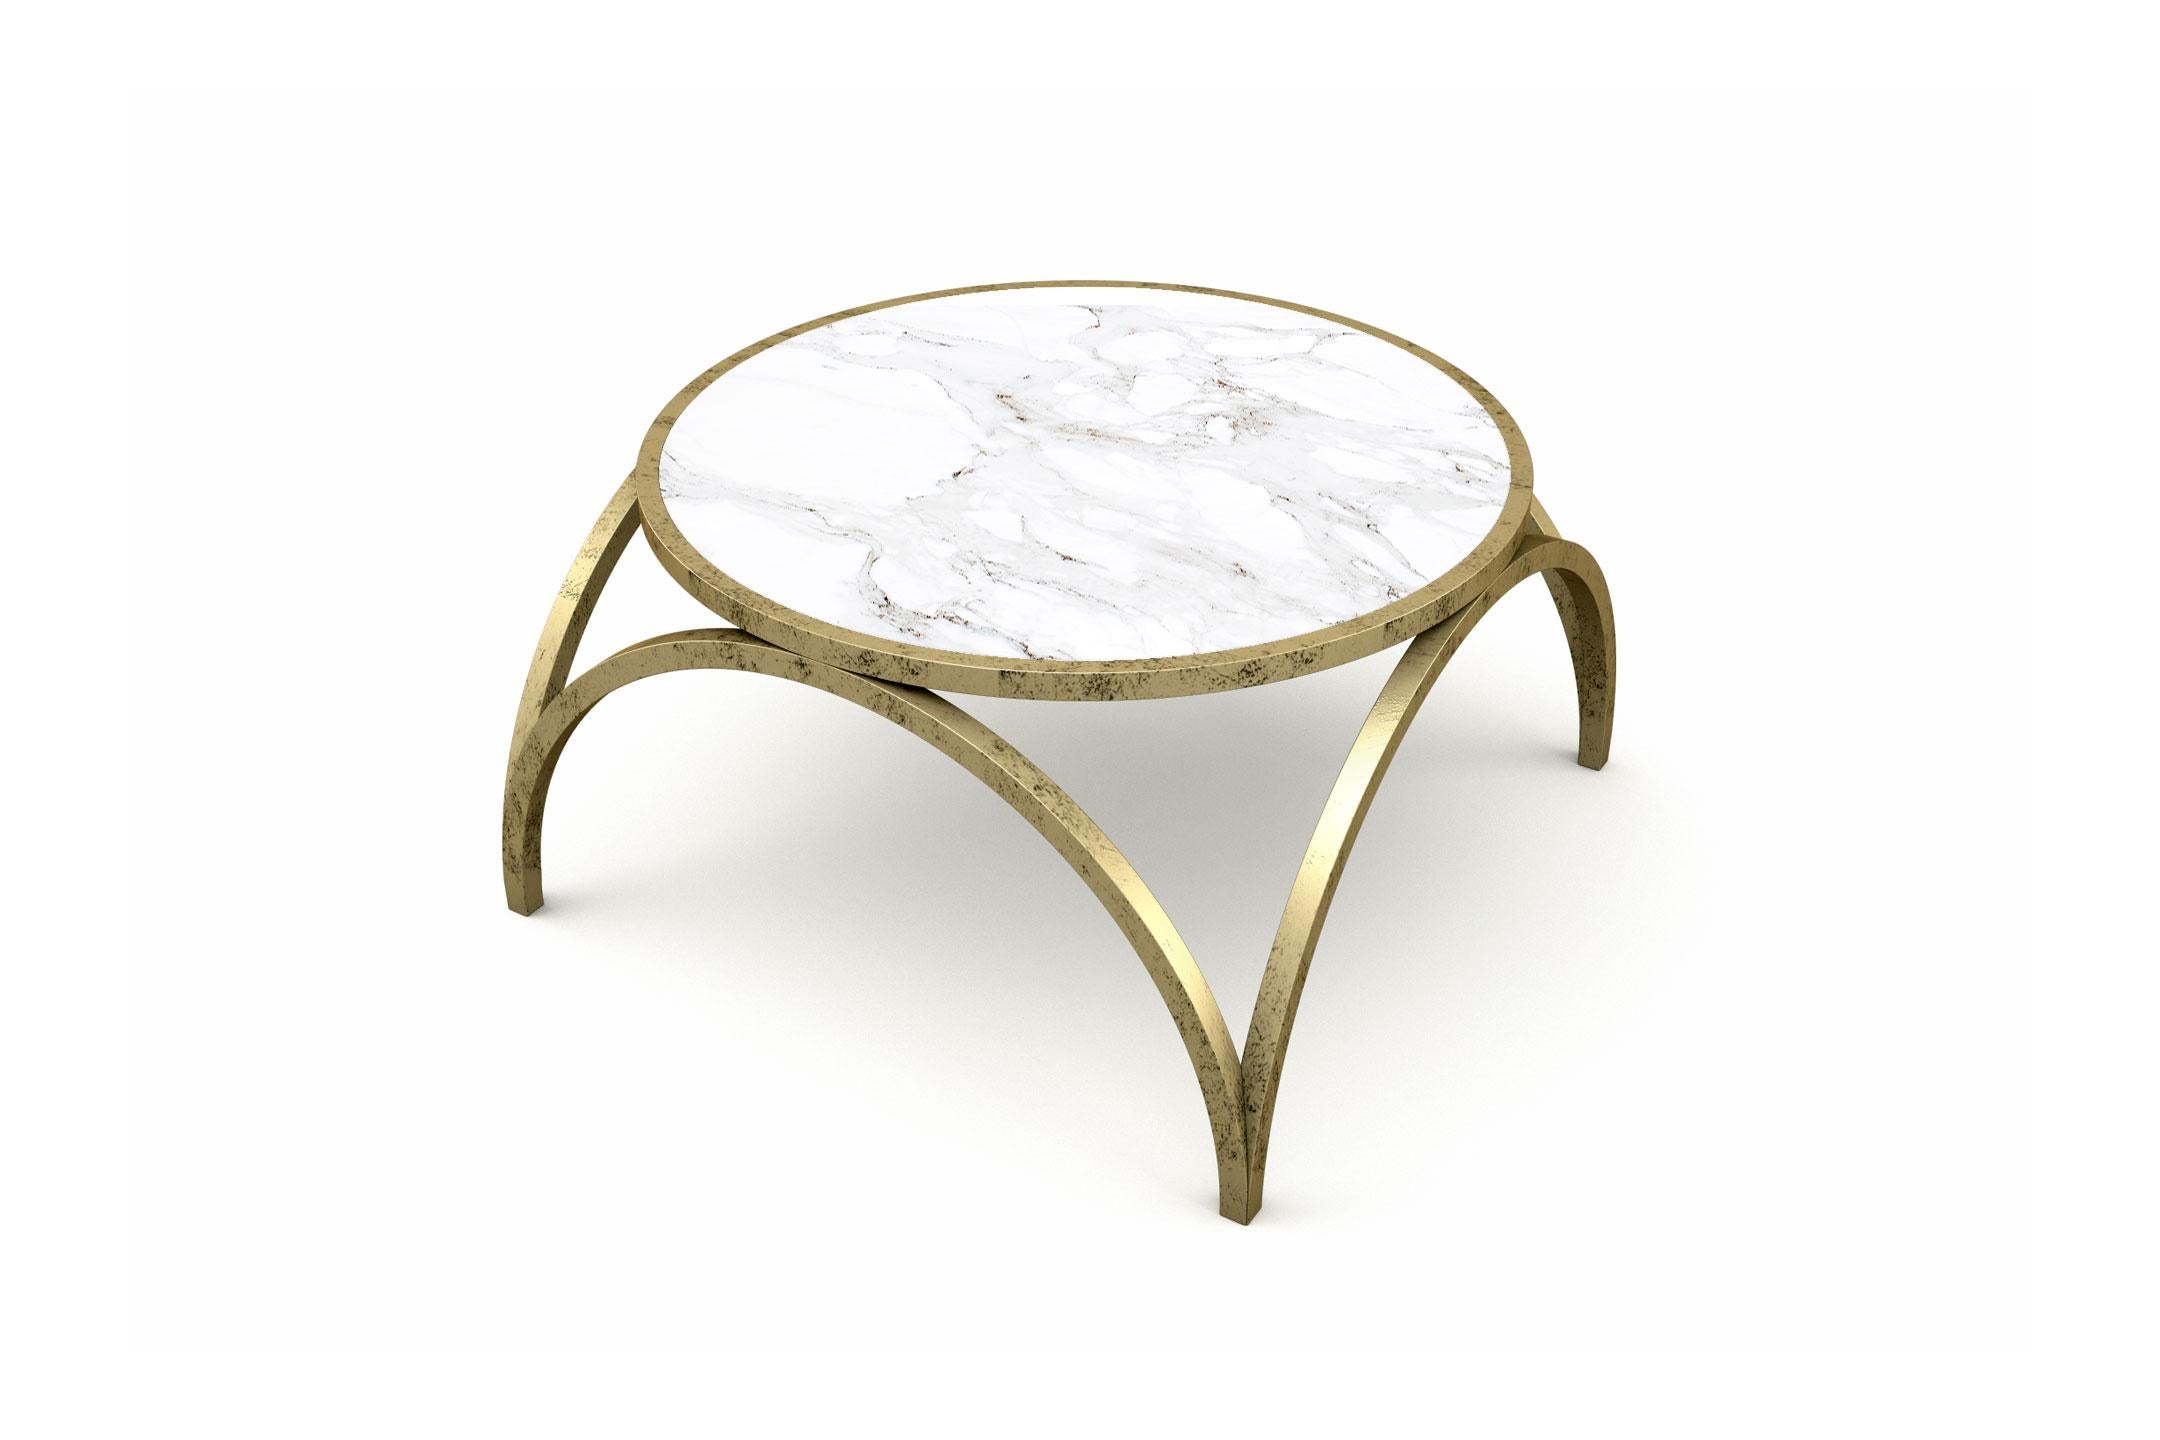 Crescent Small Coffe Table - Modern Brass Coffee Table In New Condition For Sale In London, GB